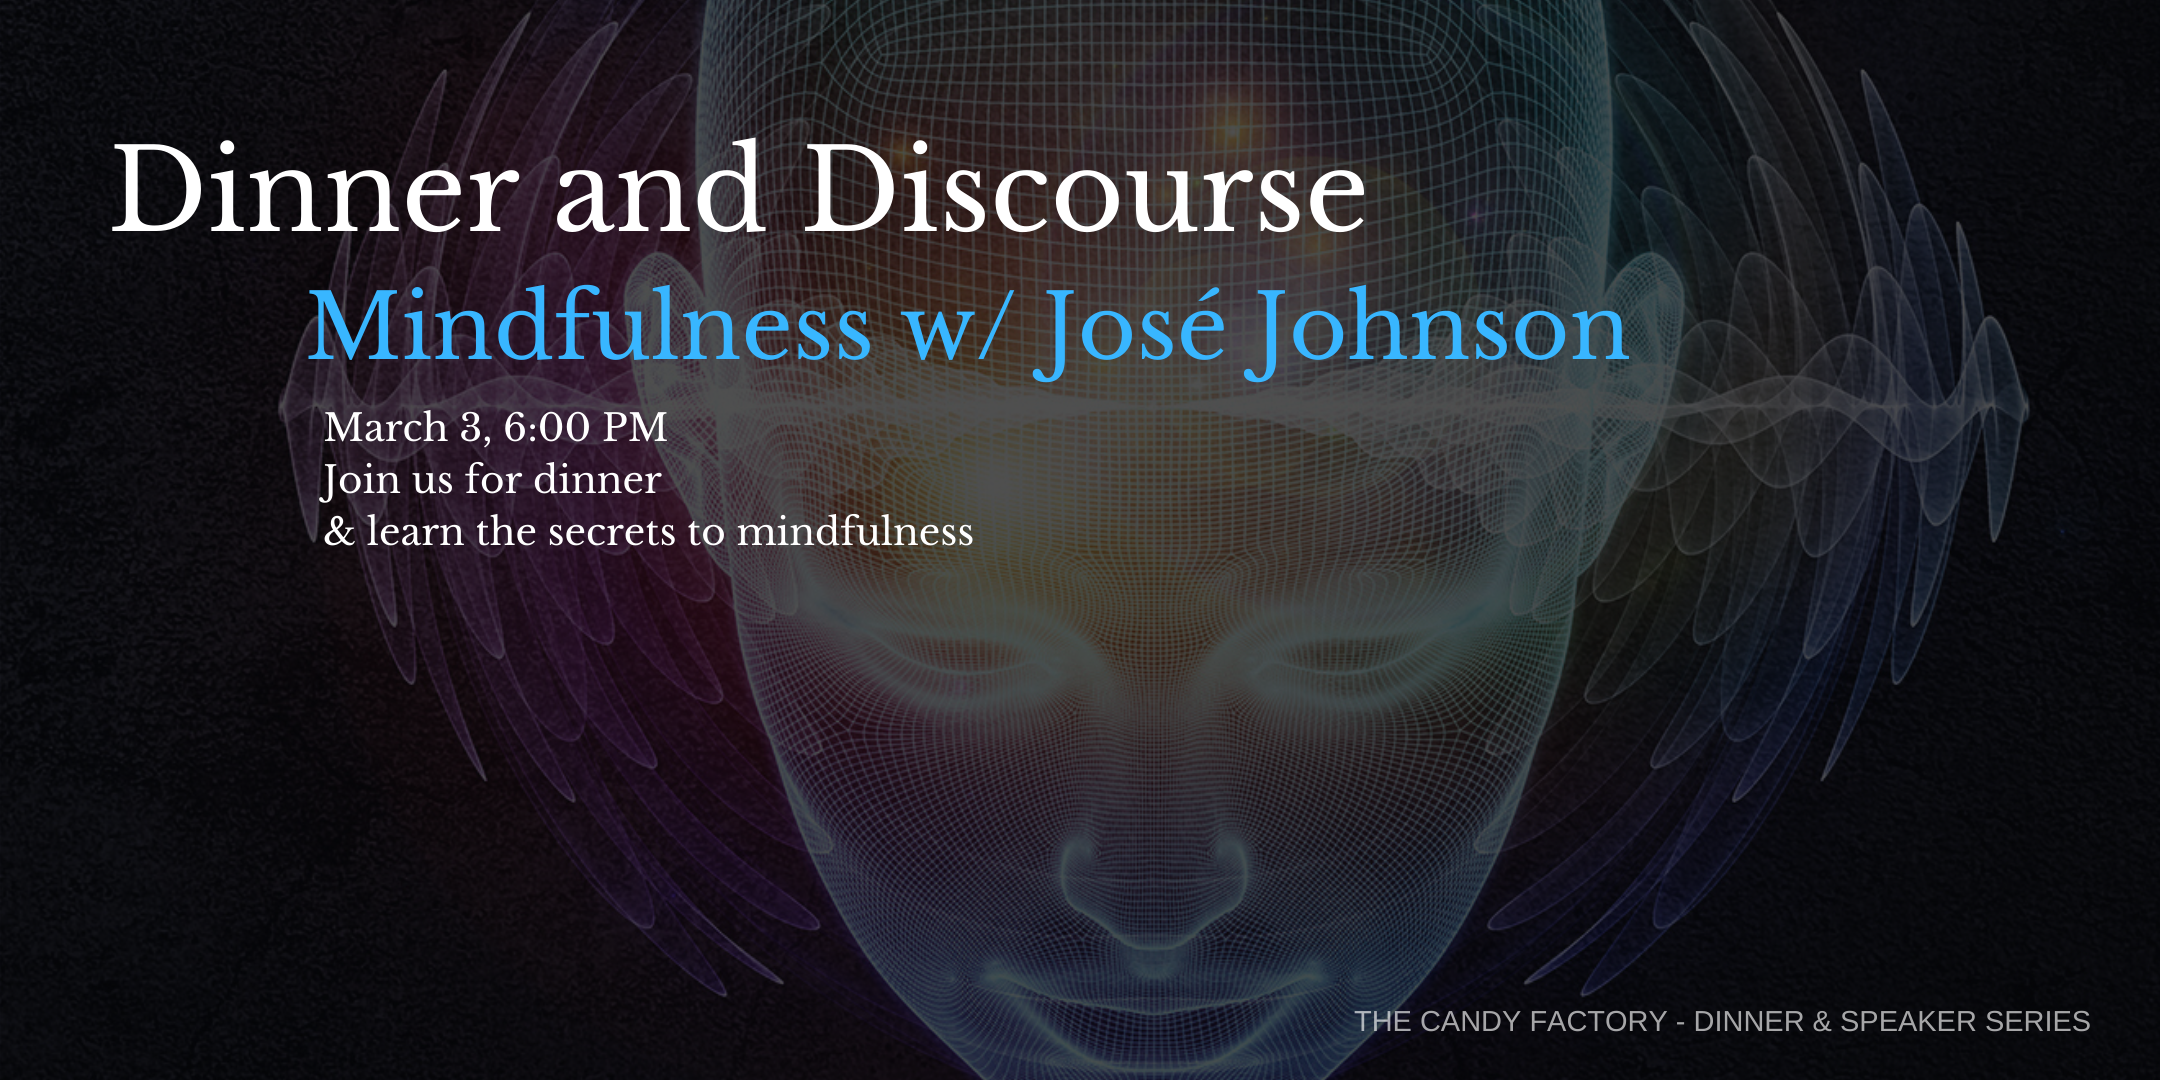 Dinner and Discourse - Mindfulness with Jose Johnson